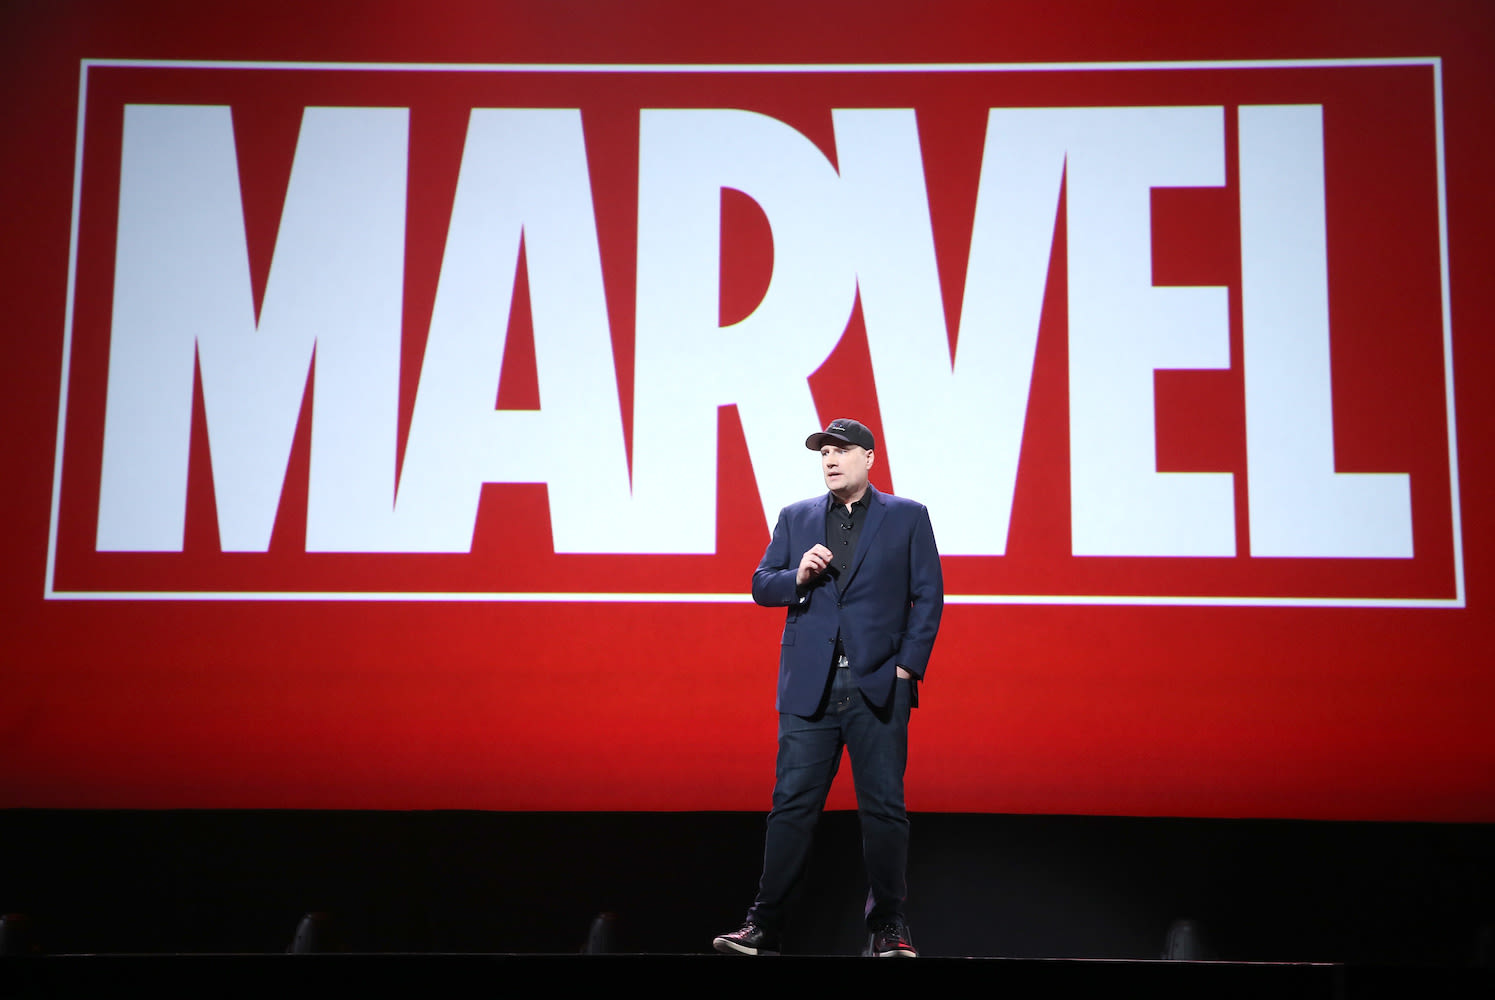 ... Sequels as an ‘Absolute Pillar of the Industry,’ Says Marvel First Thought ‘Avengers’ Could Only Work as Animated Film...